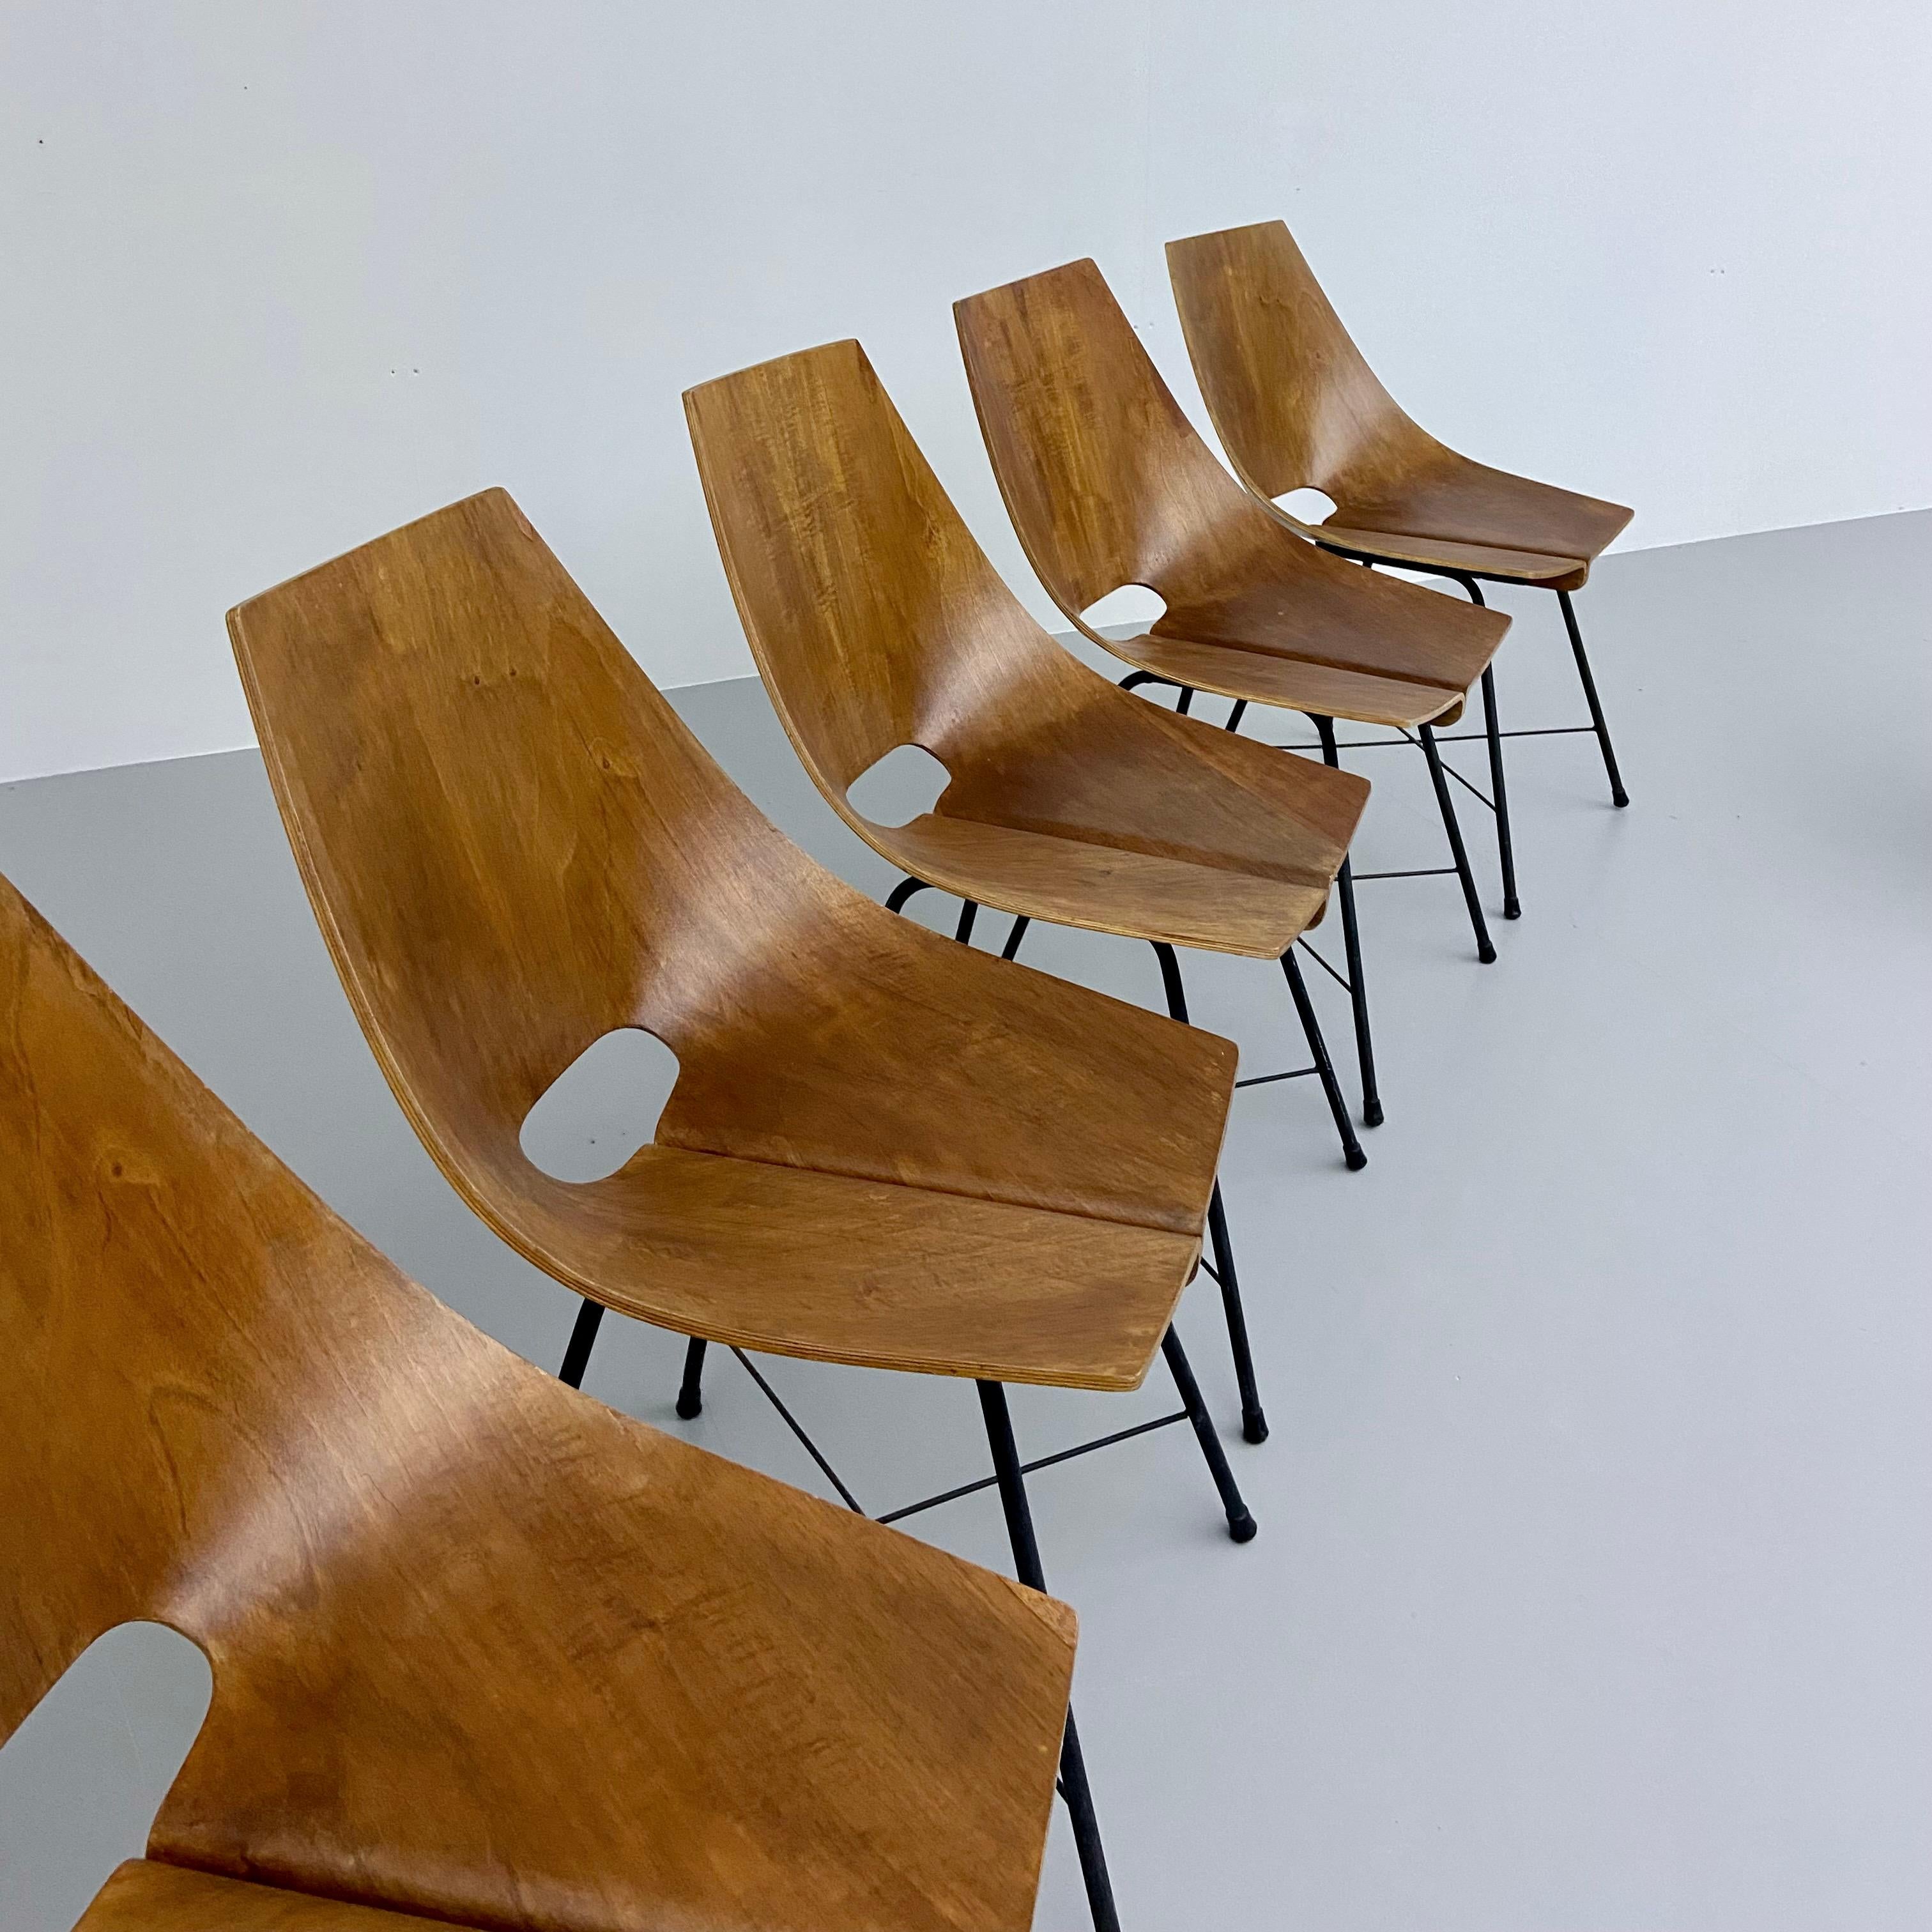 Set of 6 Dining Room Chairs by Carlo Ratti in Bended Wood and Metal, Italy, 1954 2